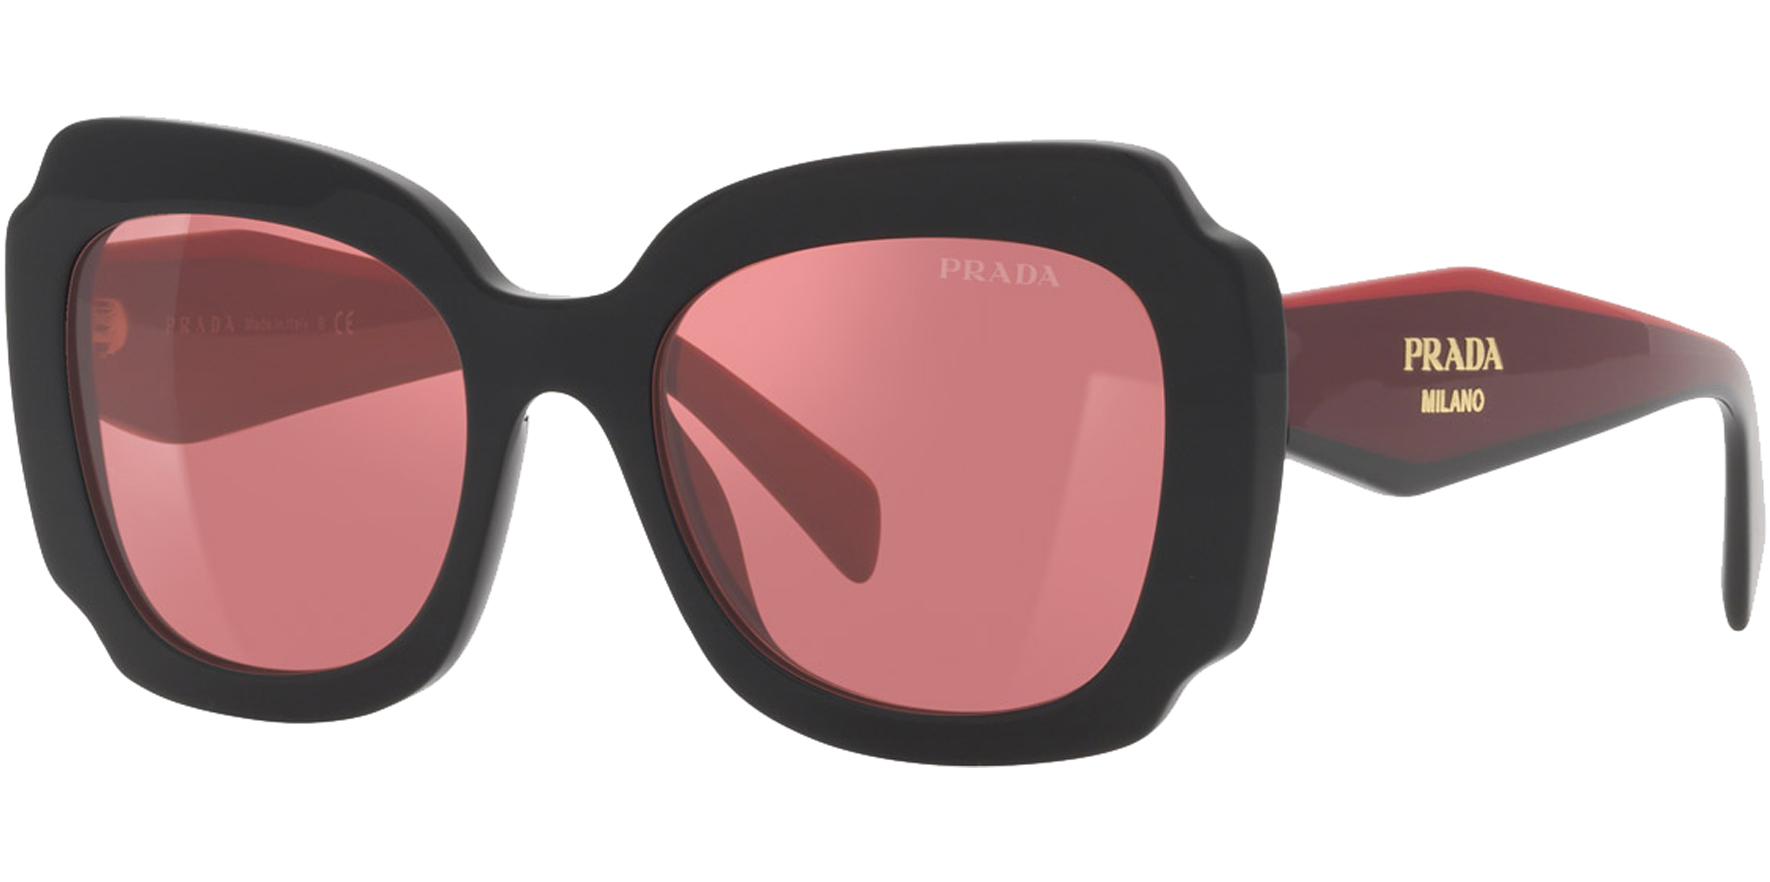 Prada Milano Alt Fit Square Butterfly w/ Mirrored Lens – Eyedictive